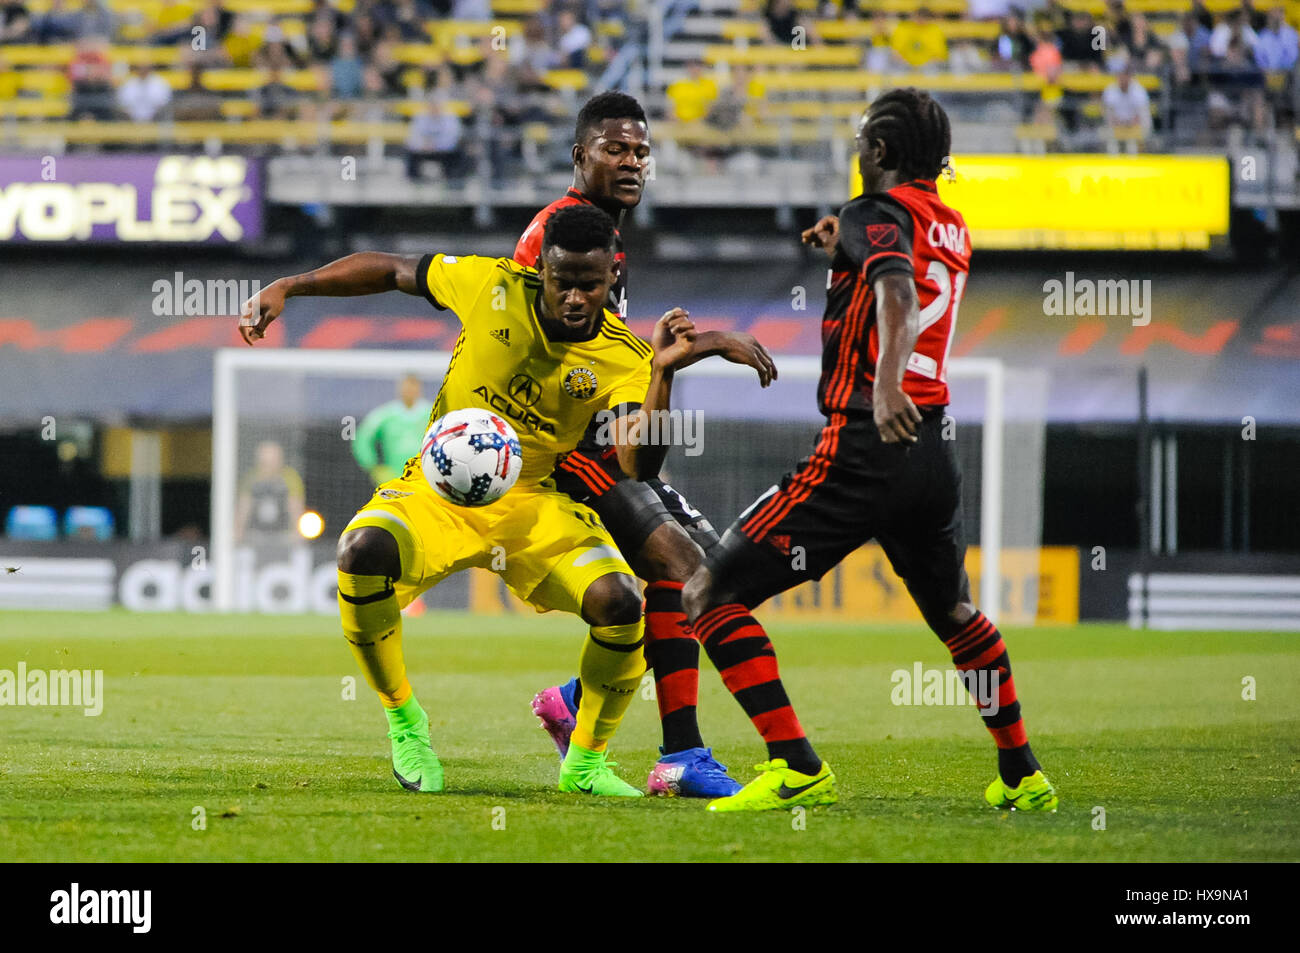 Columbus, USA. 25th March 2017. Columbus Crew SC defender Waylon Francis (14) and Portland Timbers midfielder Diego Chara (21) battle for the ball in the second half of the match between Portland Timbers and Columbus Crew SC at MAPFRE Stadium, in Columbus OH. Saturday, March 25, 2017. Final Score - Columbus Crew SC 3 - Portland Timbers 2 .Photo Credit: Dorn Byg/CSM/Alamy Live News Stock Photo